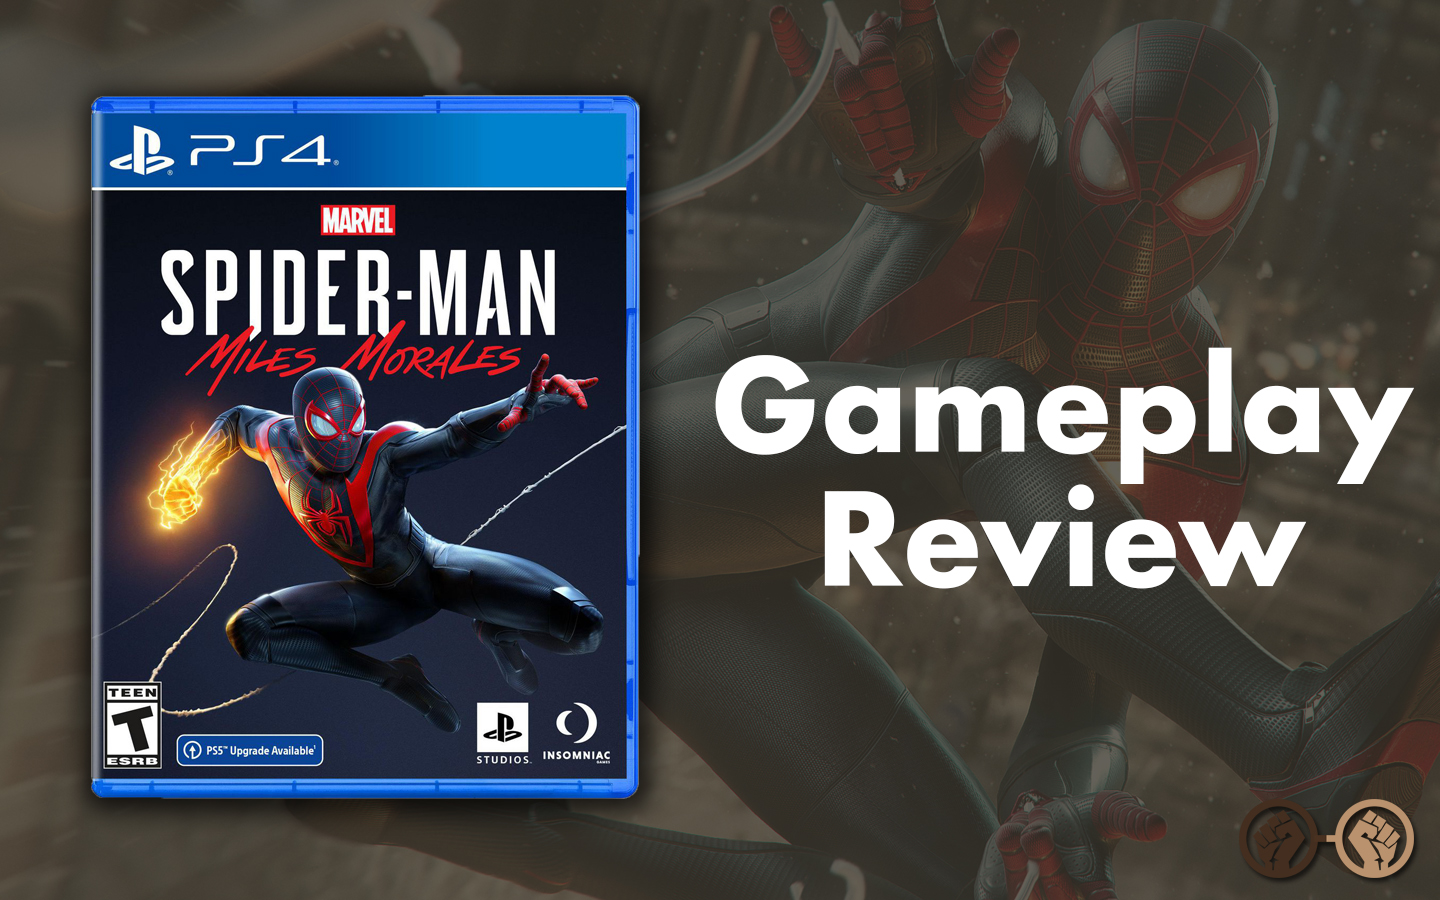 ‘Marvel’s Spider-Man: Miles Morales’ For PS4 Is A Masterfully Crafted Spidey Story – Review